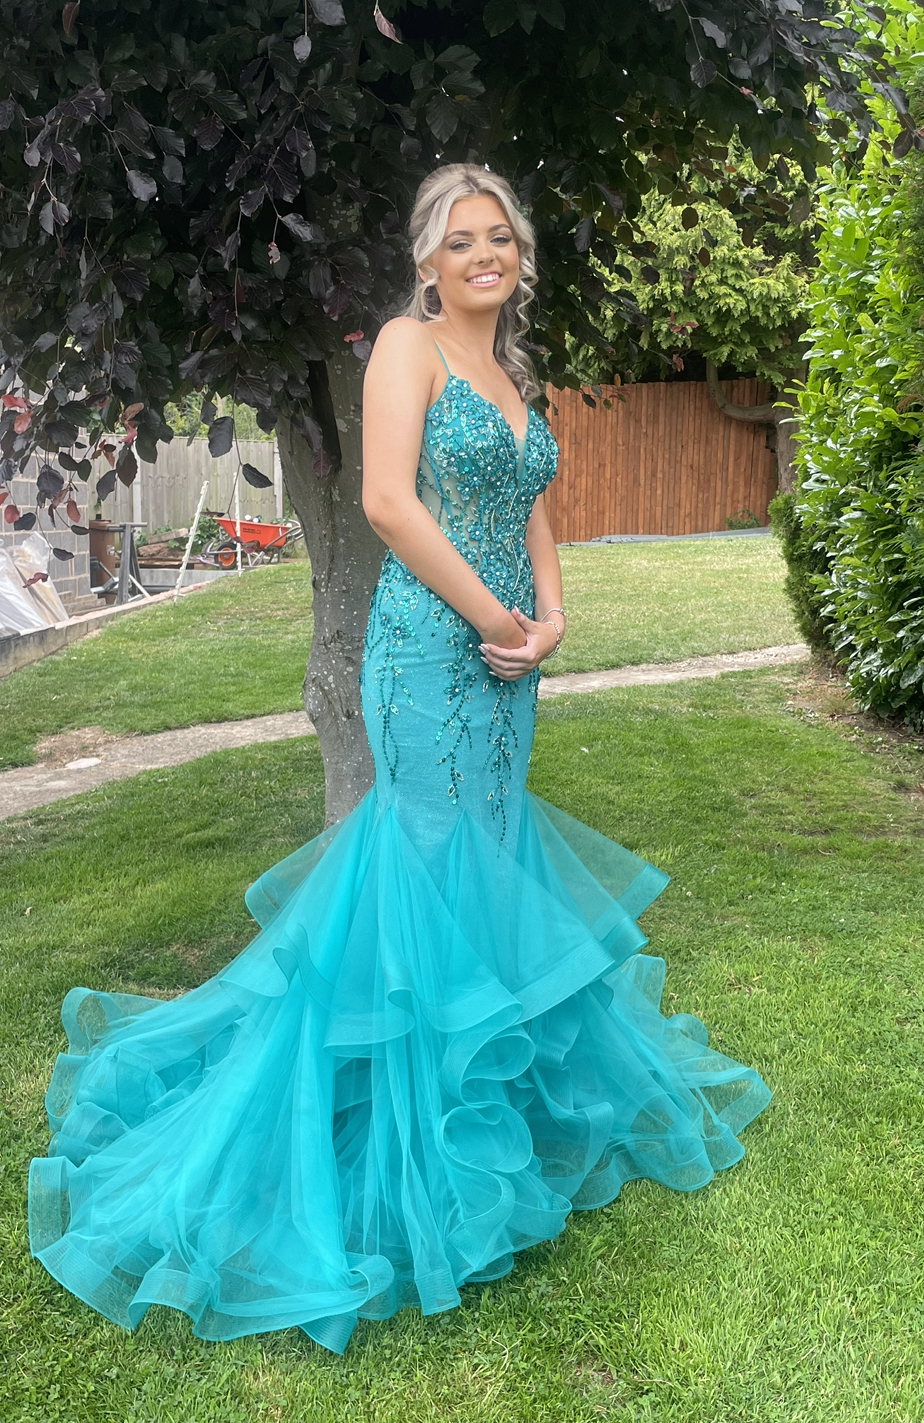 Maisie Jayne Roberts, From Bagillt, ready for the Flint High School prom.